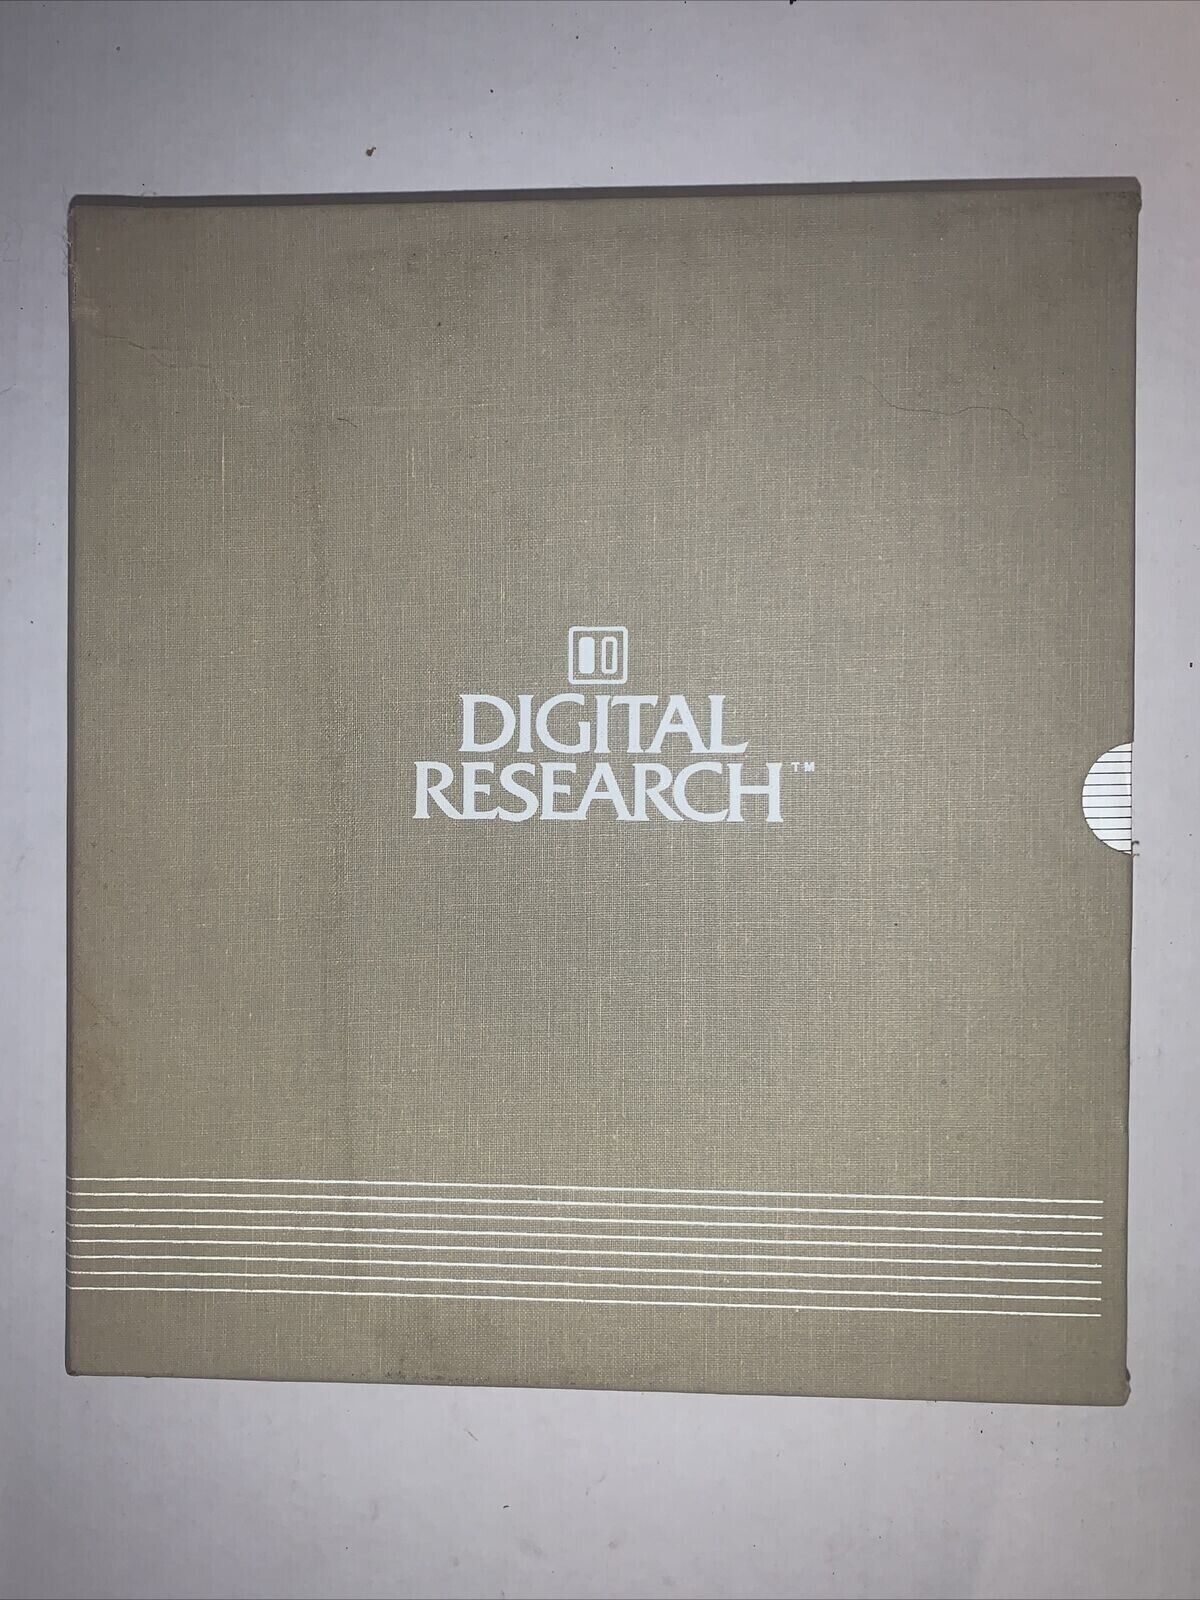 Digital Research CBASIC w/ Software Tandy Digital Research Sb17